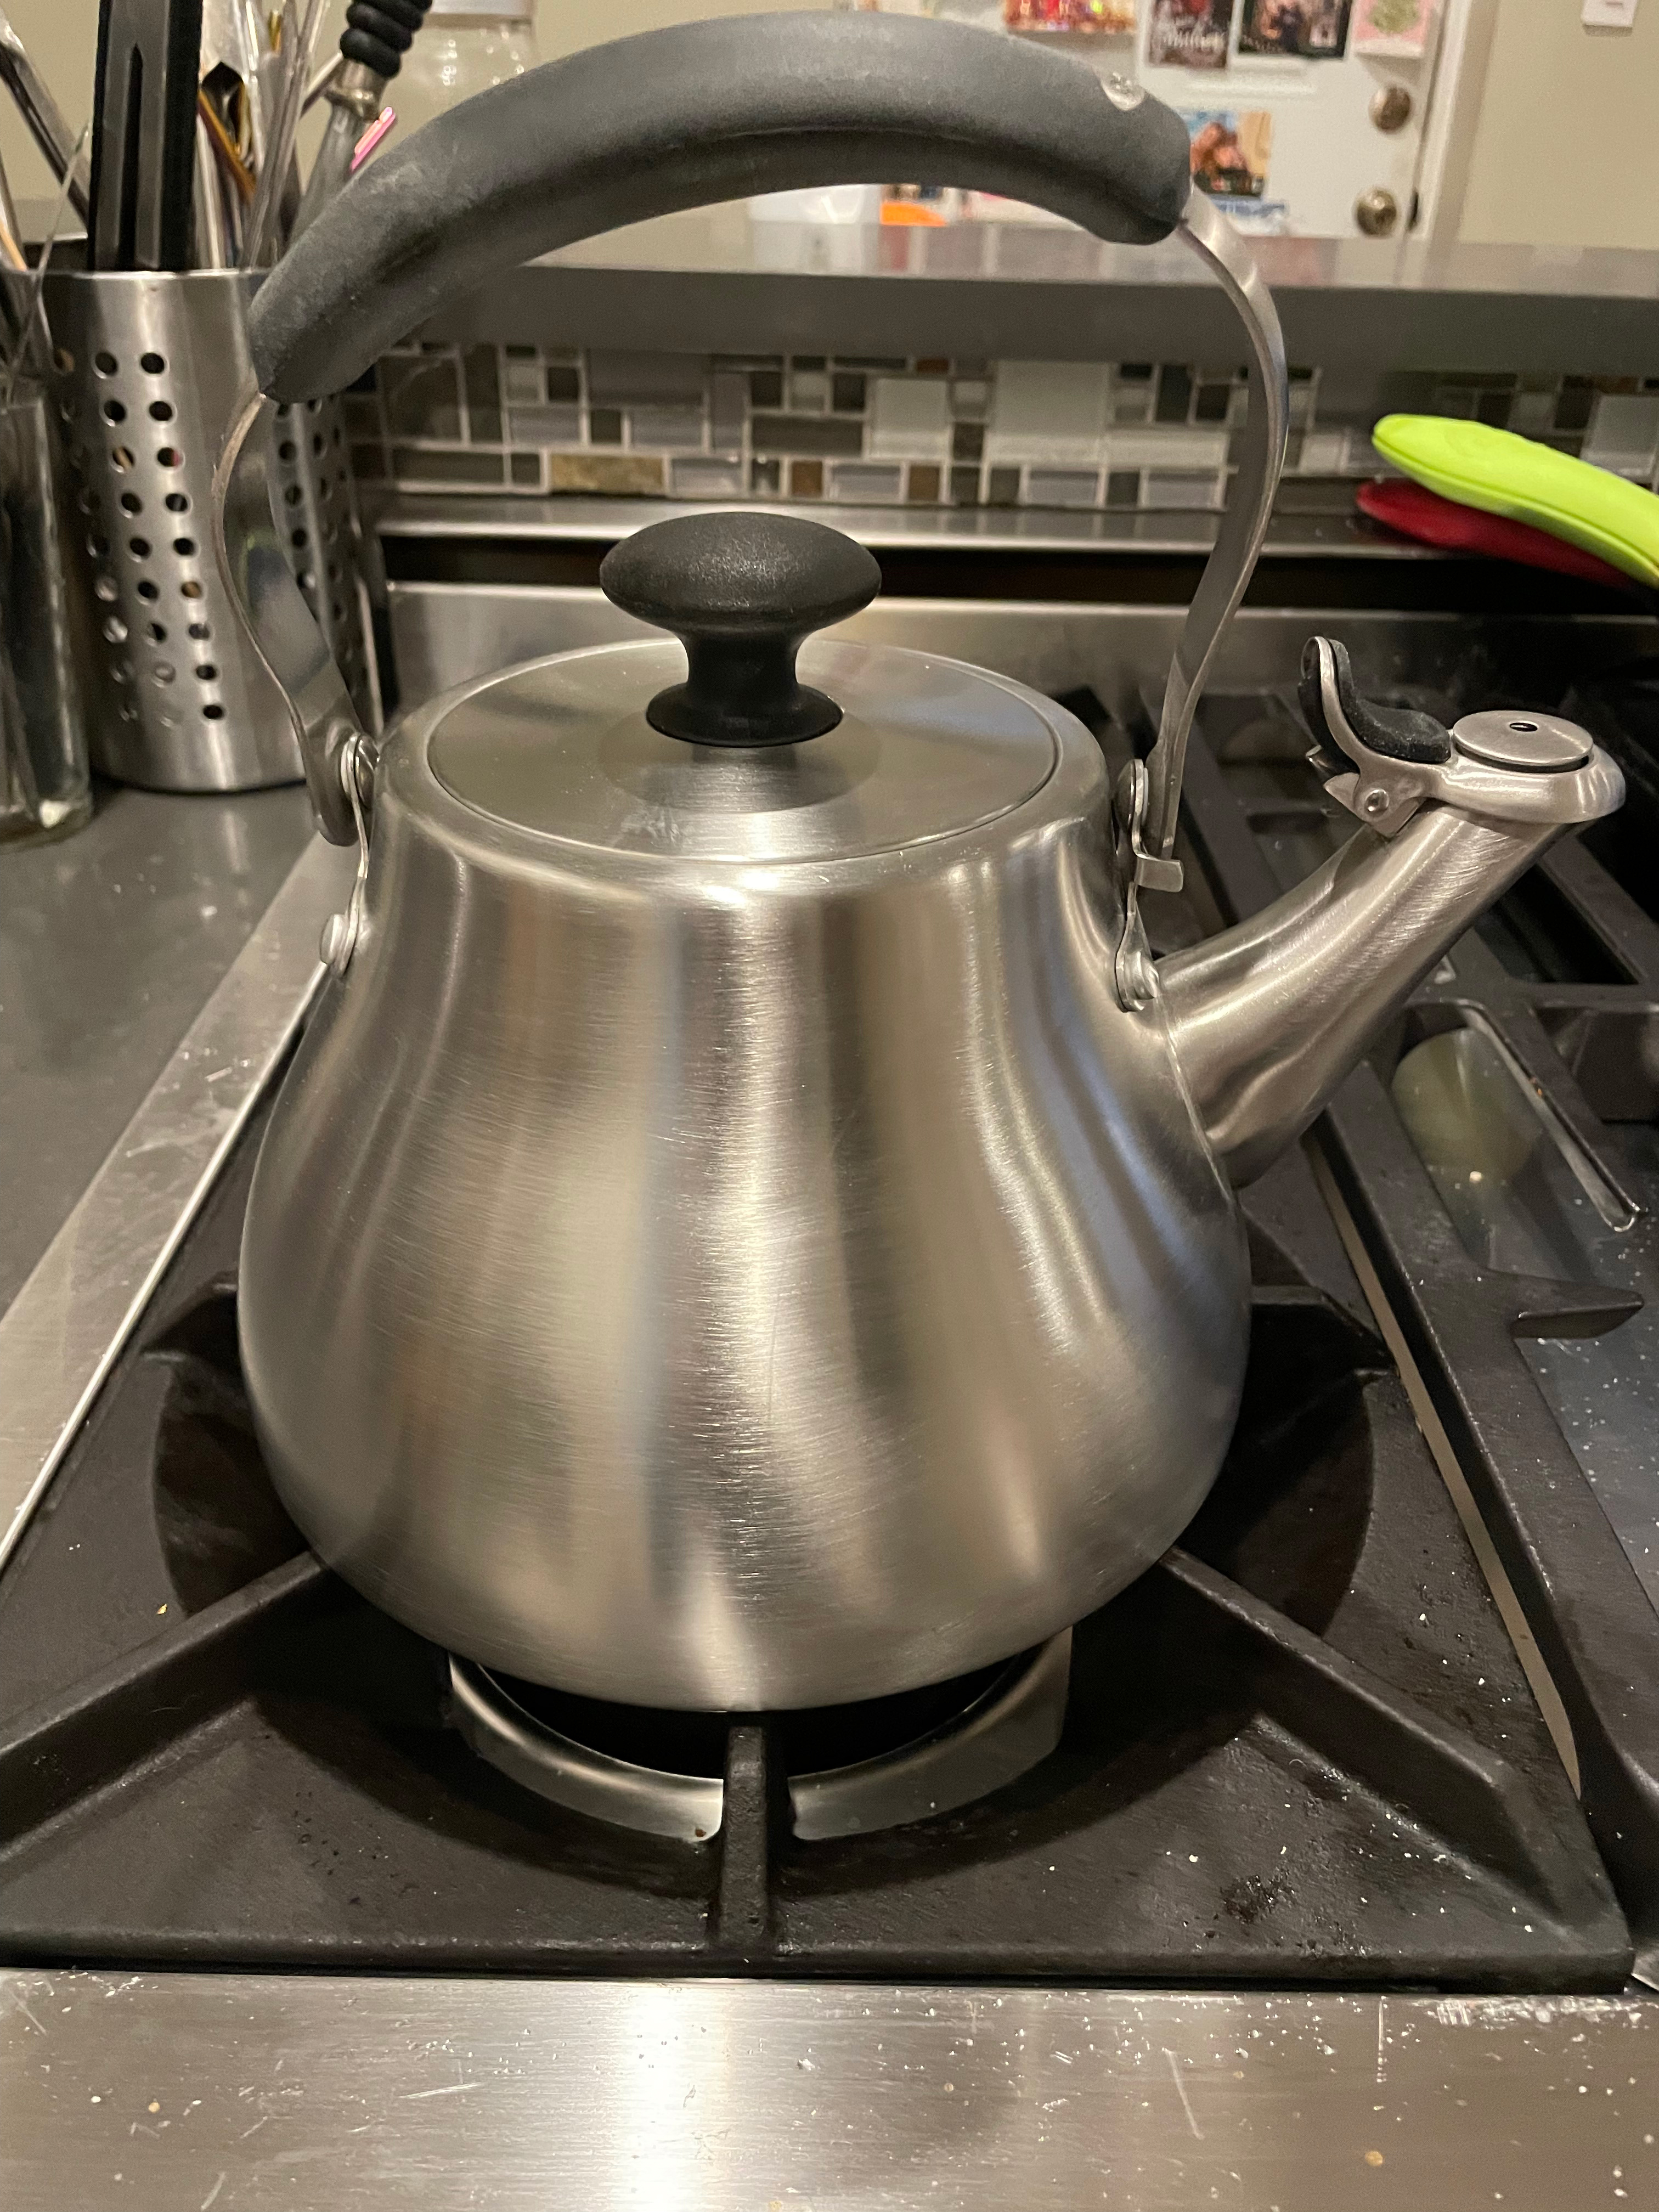 https://food.fnr.sndimg.com/content/dam/images/food/unsized/2023/10/fn_stovetop-kettle-testing-photo-1_unsized.jpg